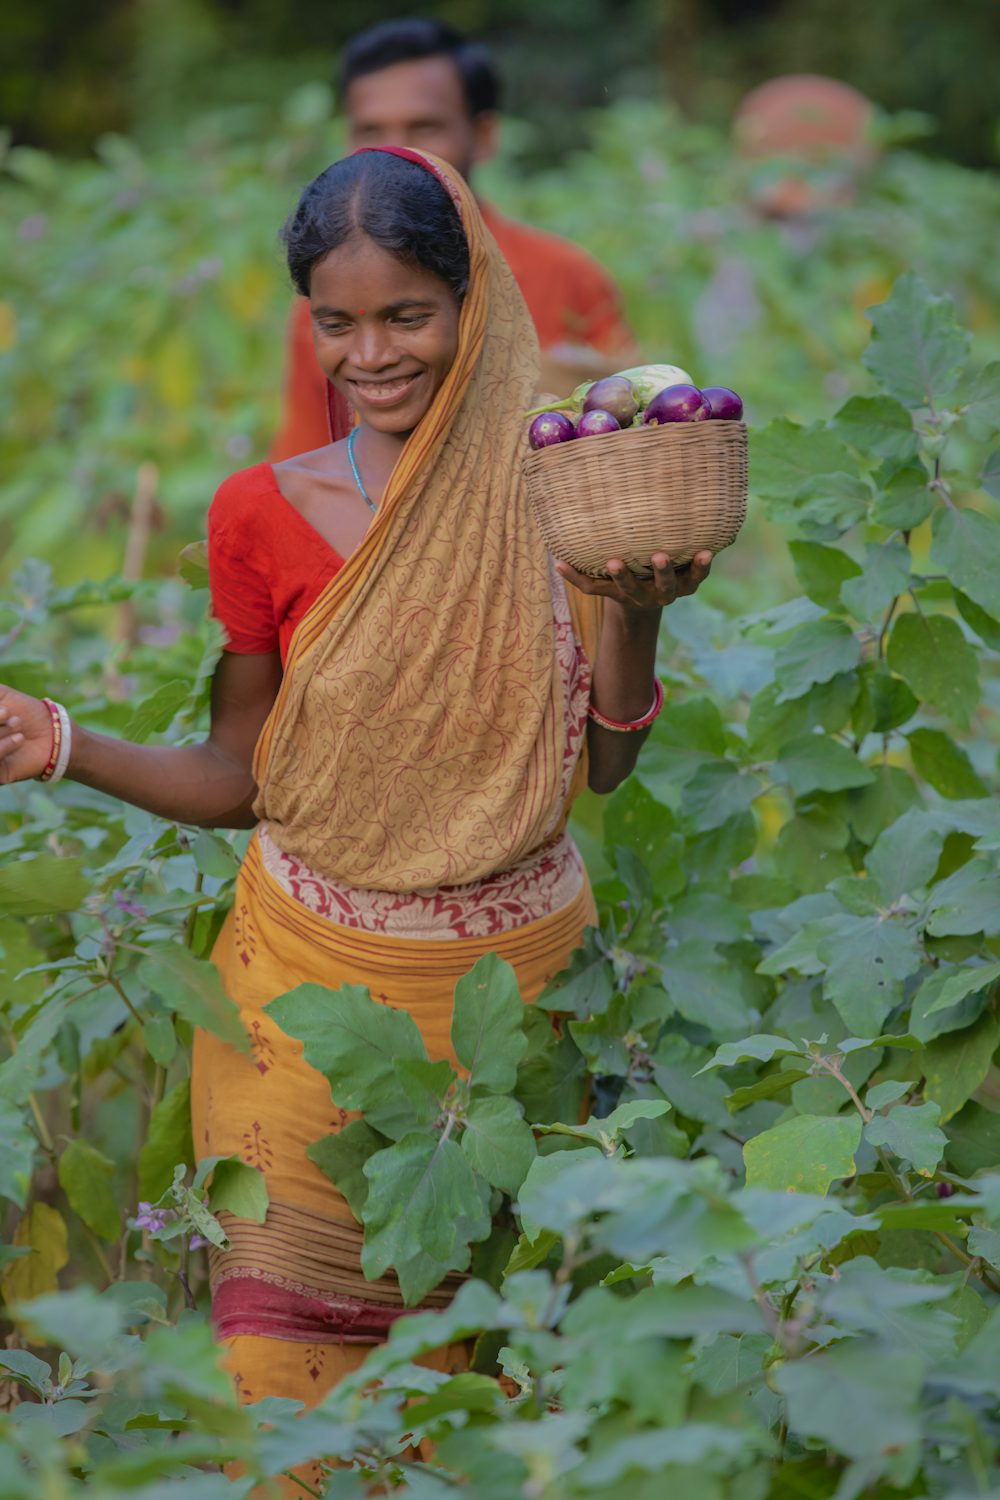 A smiling woman in India walks through her vegetable field.